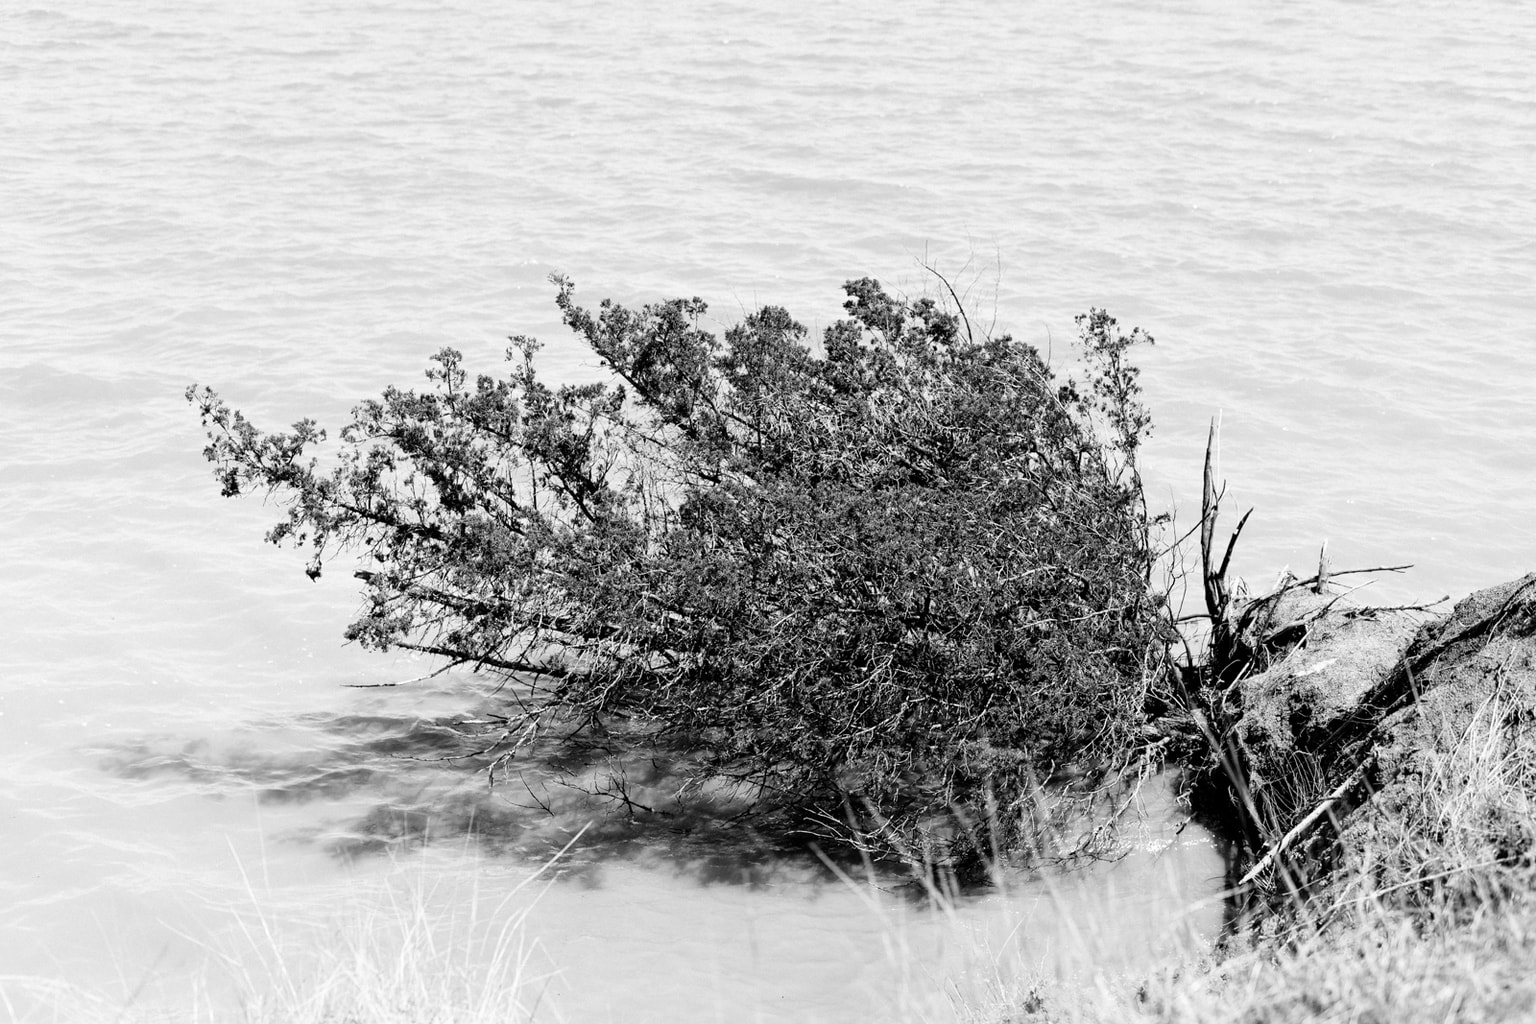 Trees In Lake Ray Hubbard Contrast Starkly Against The Muddy Water